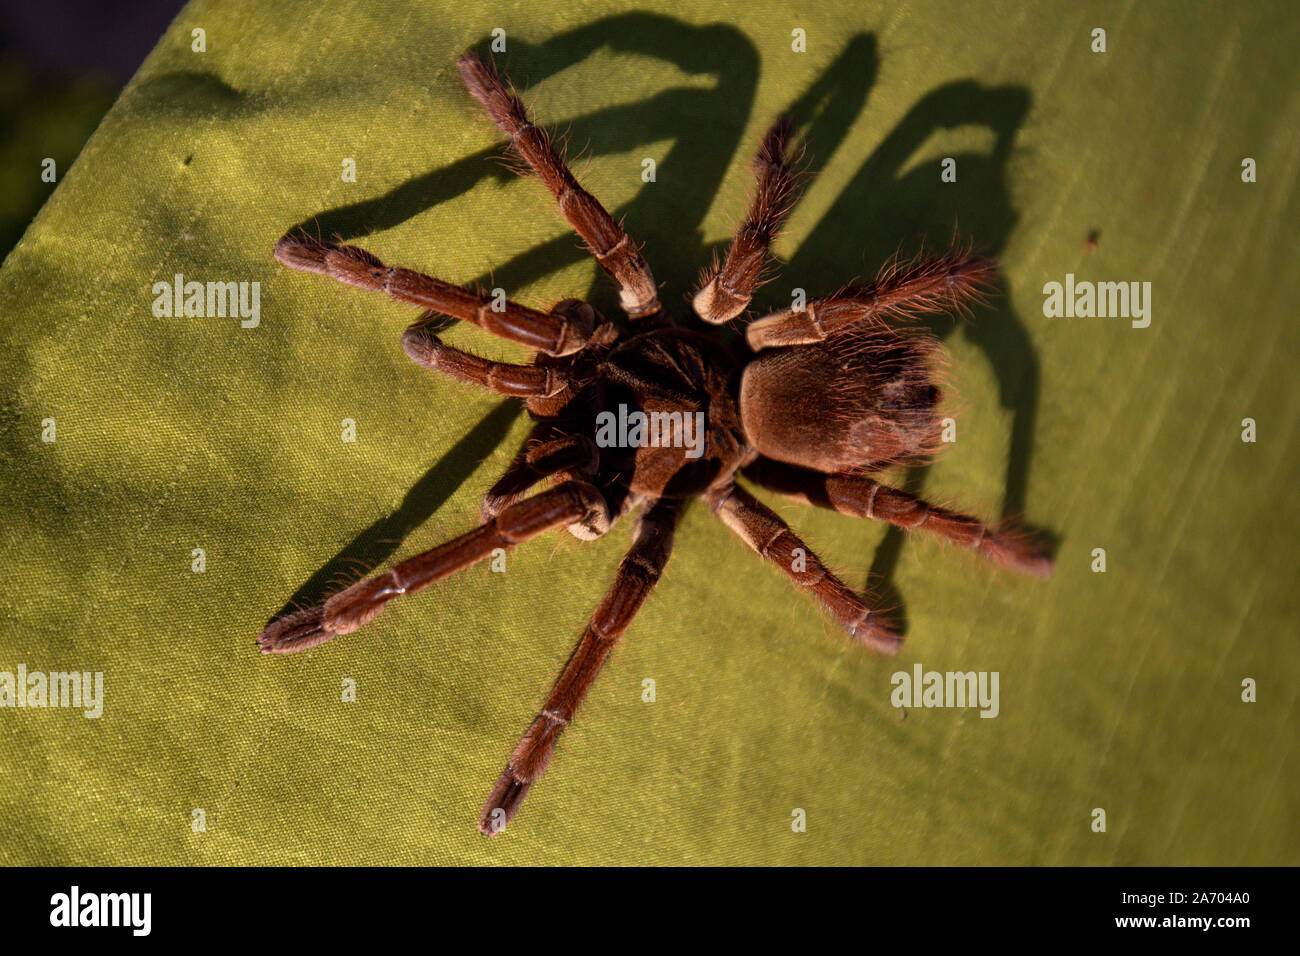 Boris, a Goliath birdeater spider belonging to Carrie Alcock, at Carrie's home in Cheadle, Staffordshire ahead of the National Pet Show at the NEC on November 2 and 3. Stock Photo